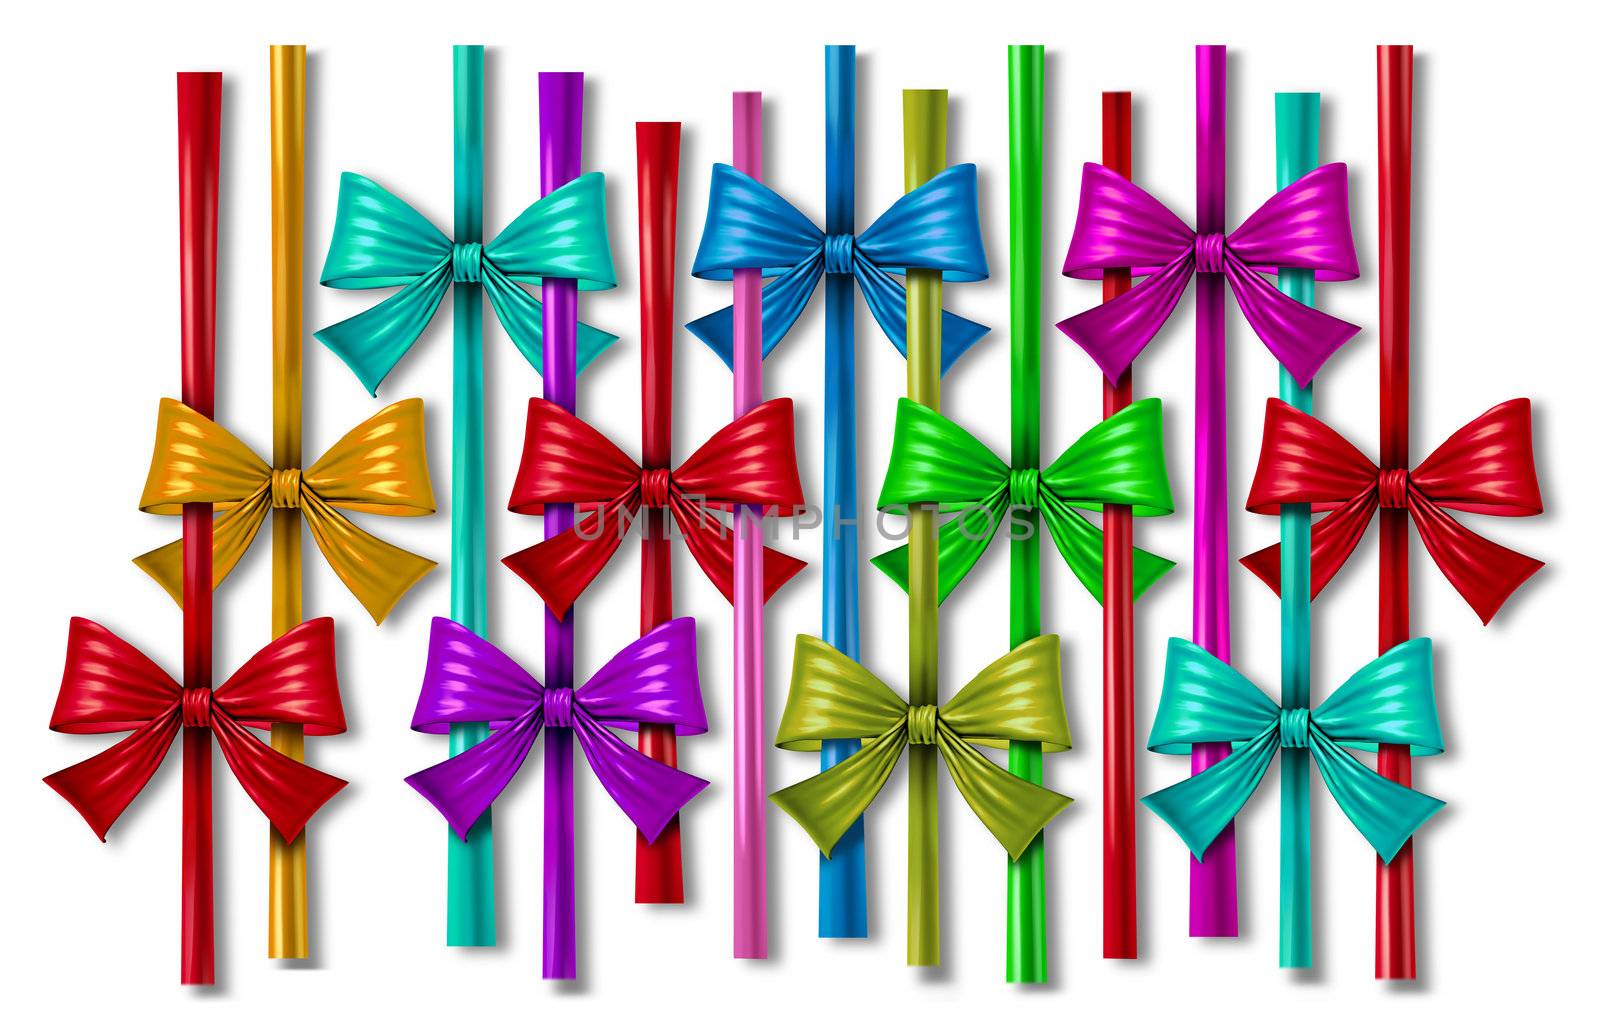 Ribbon bow design element with a pattern of silk decorative color strands as a celebration of the Holidays including Christmas New years eve birthday parties and anniversaries on white.